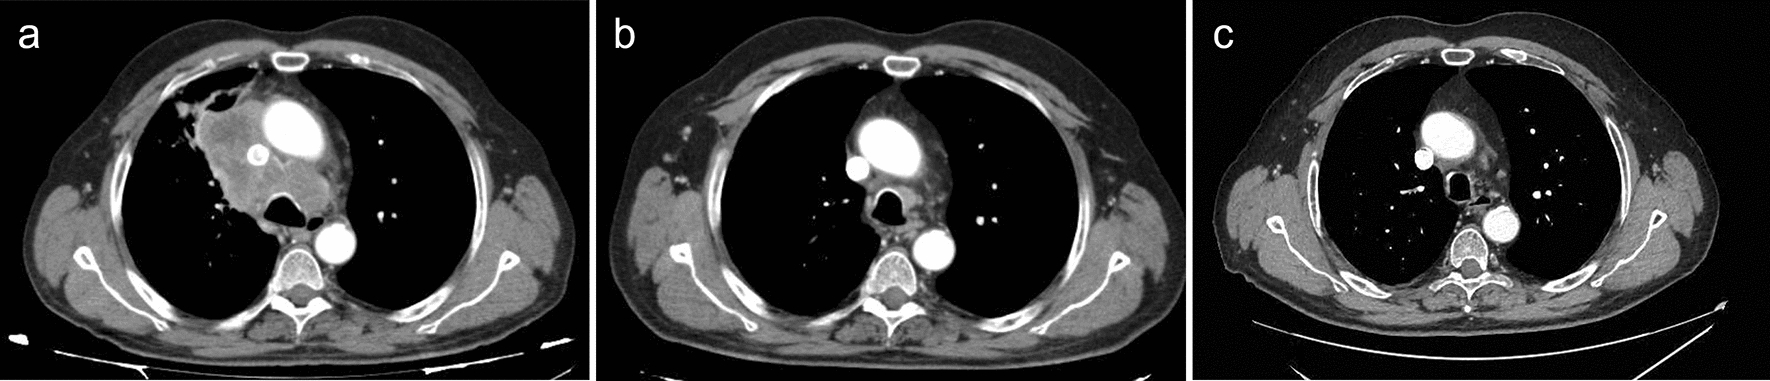 Long-Term Survival and Stable Disease in a Patient with Extensive-Stage Small-Cell Lung Cancer after Treatment with Carboplatin, Etoposide and Atezolizumab